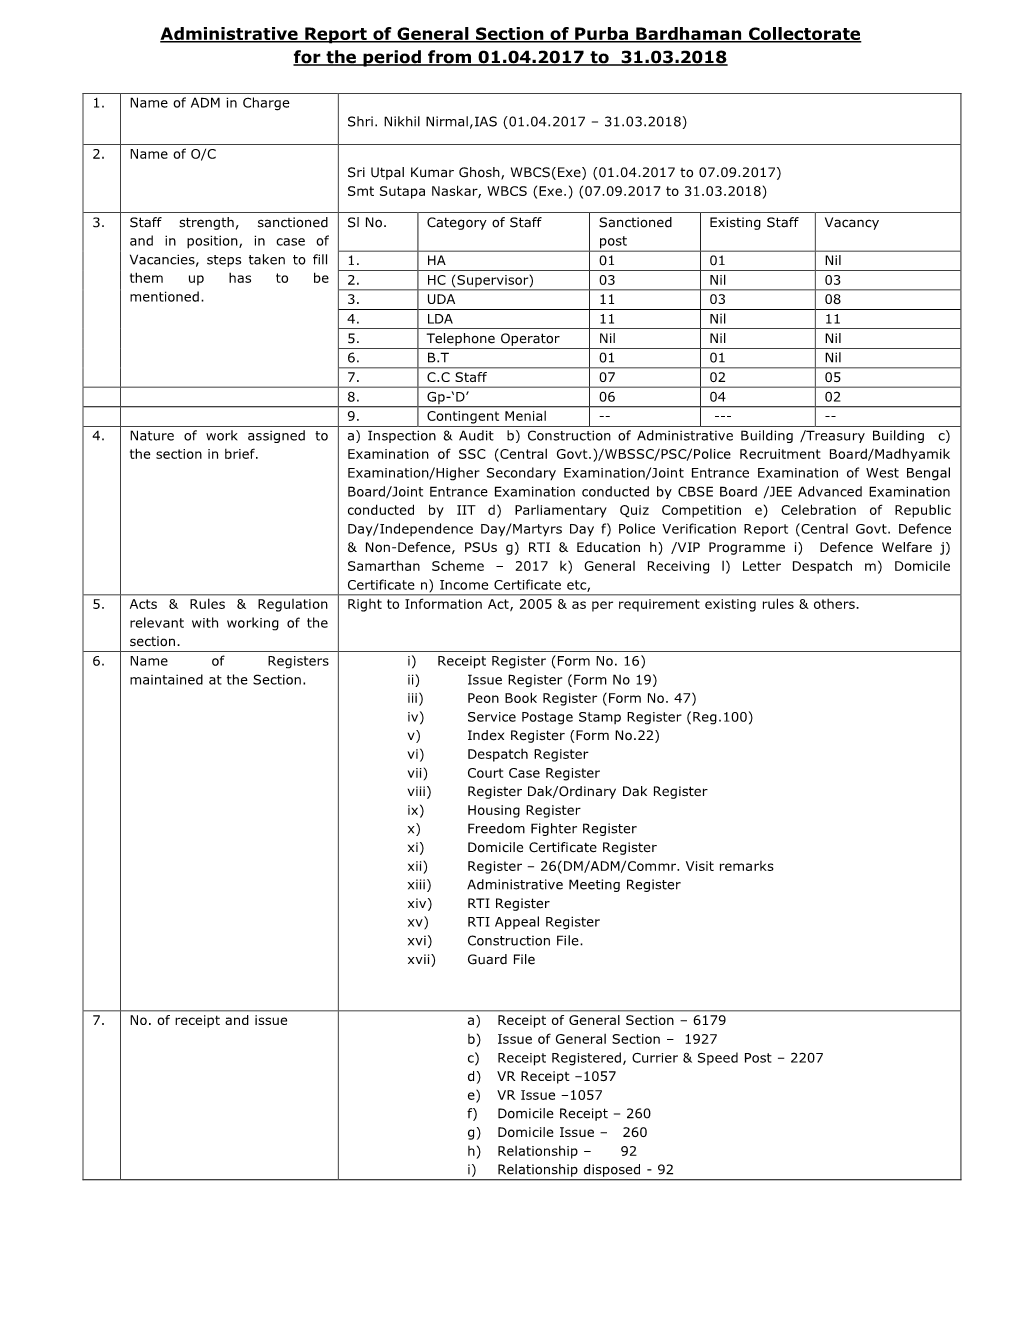 Administrative Report of General Section of Purba Bardhaman Collectorate for the Period from 01.04.2017 to 31.03.2018